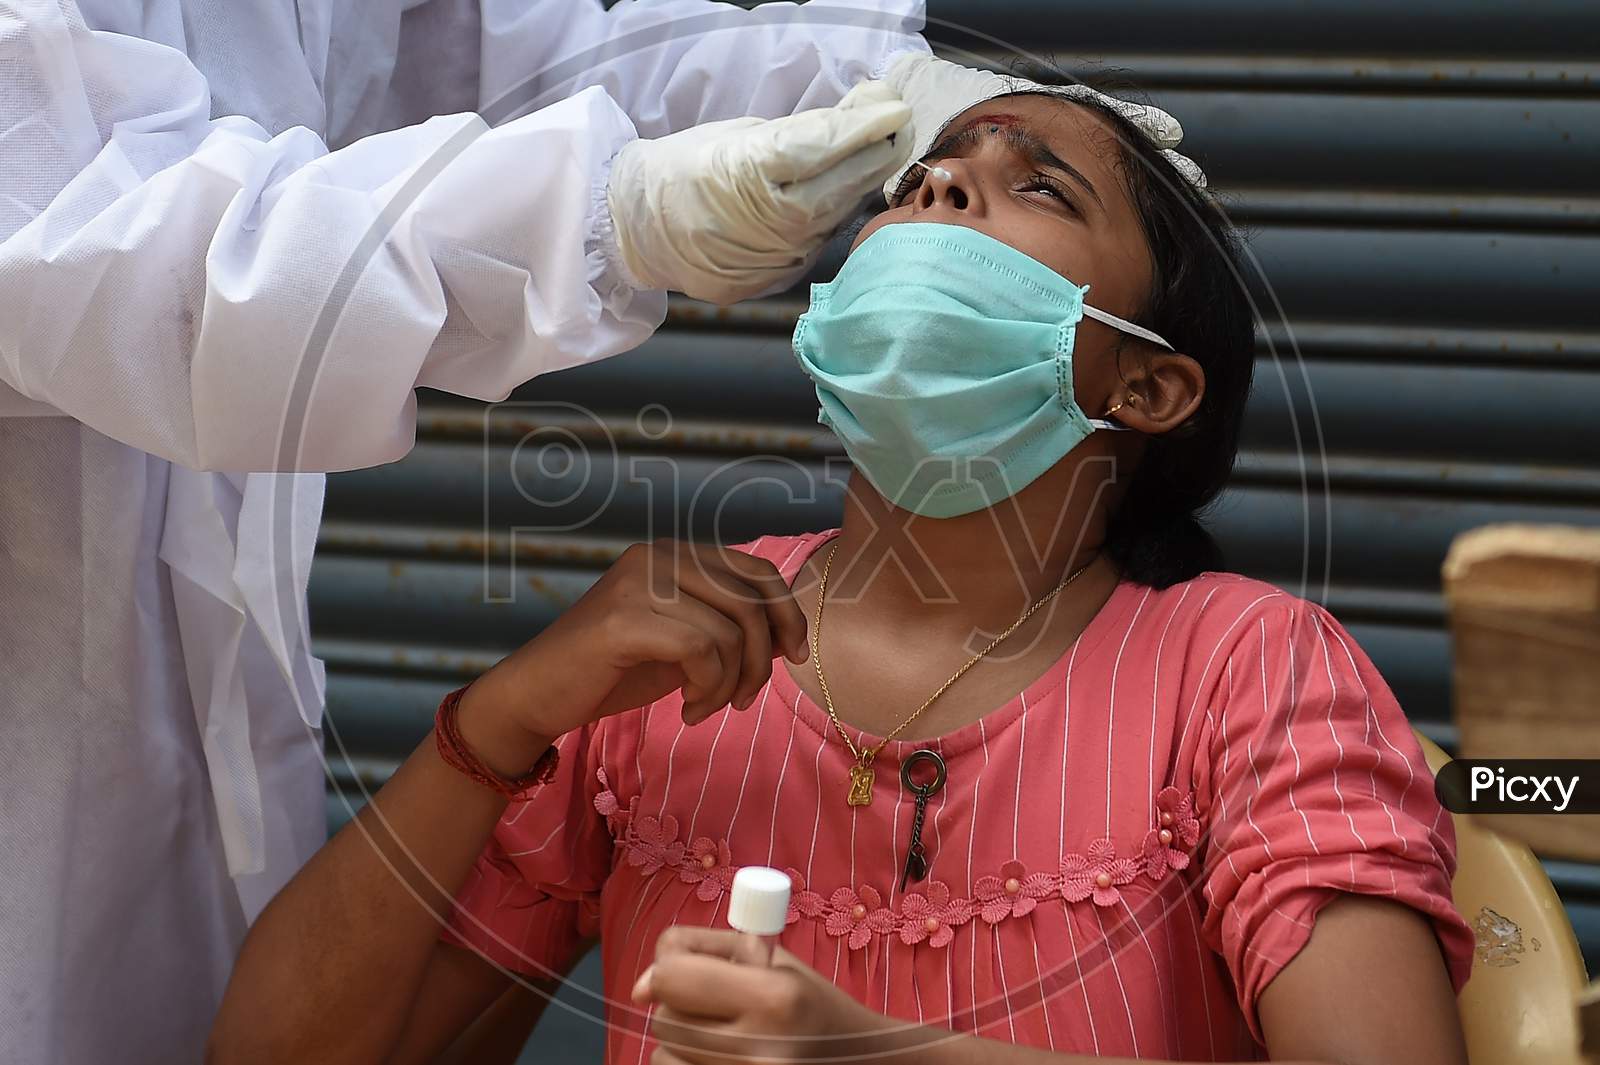 A health worker collects swab samples for Covid-19 testing at a medical camp in Chennai on July 11, 2020